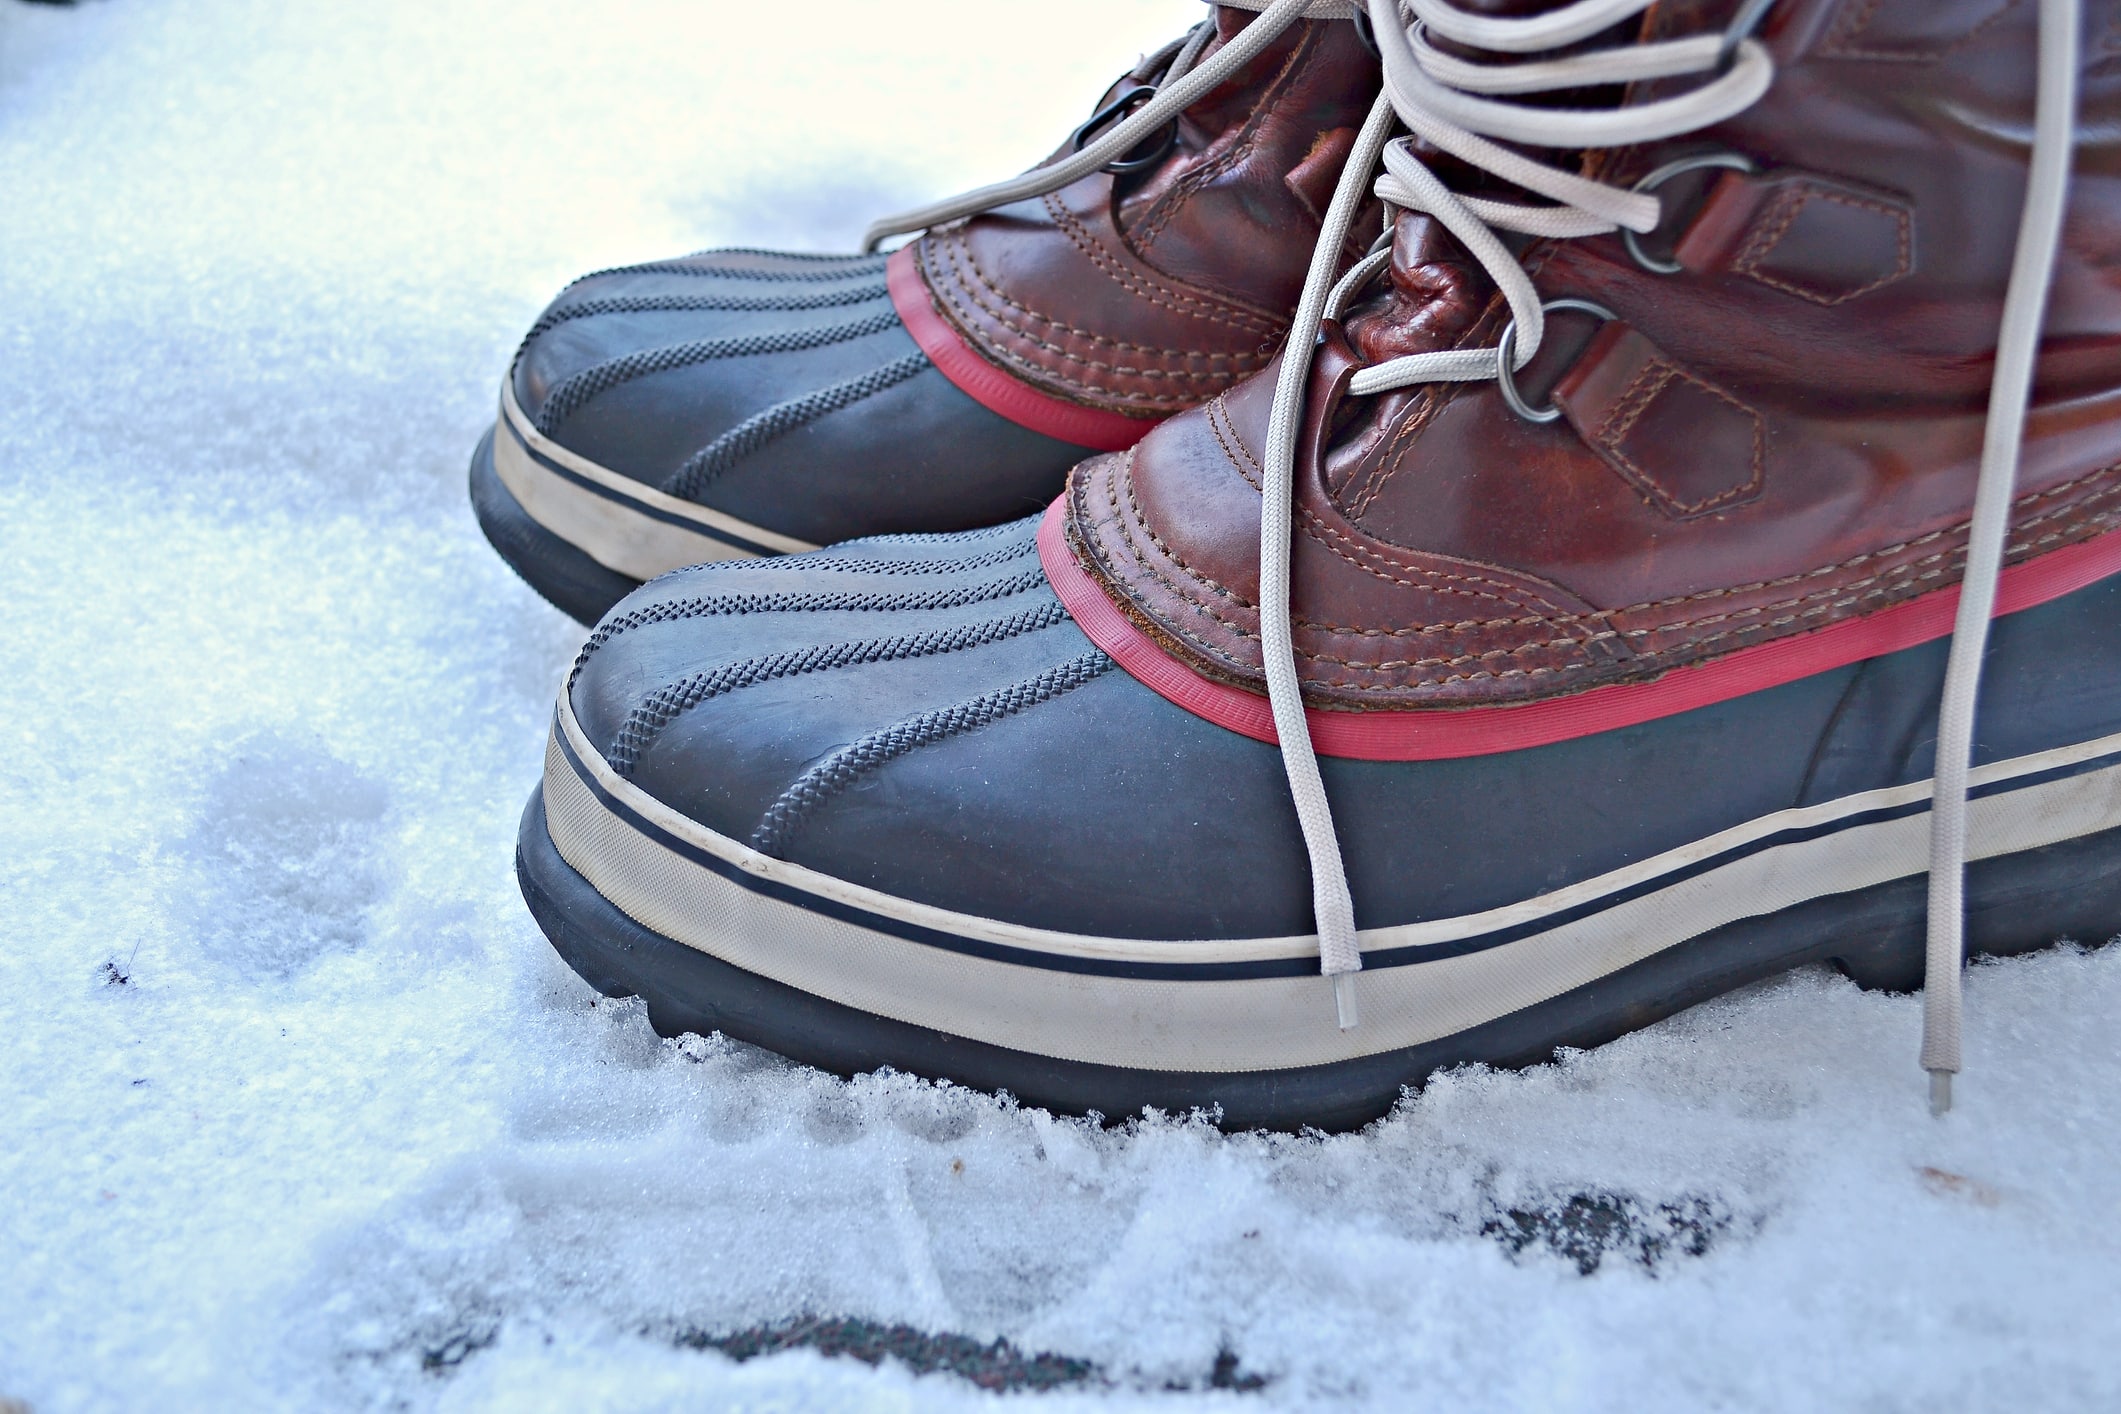 Men's snow boots standing on snow outdoors